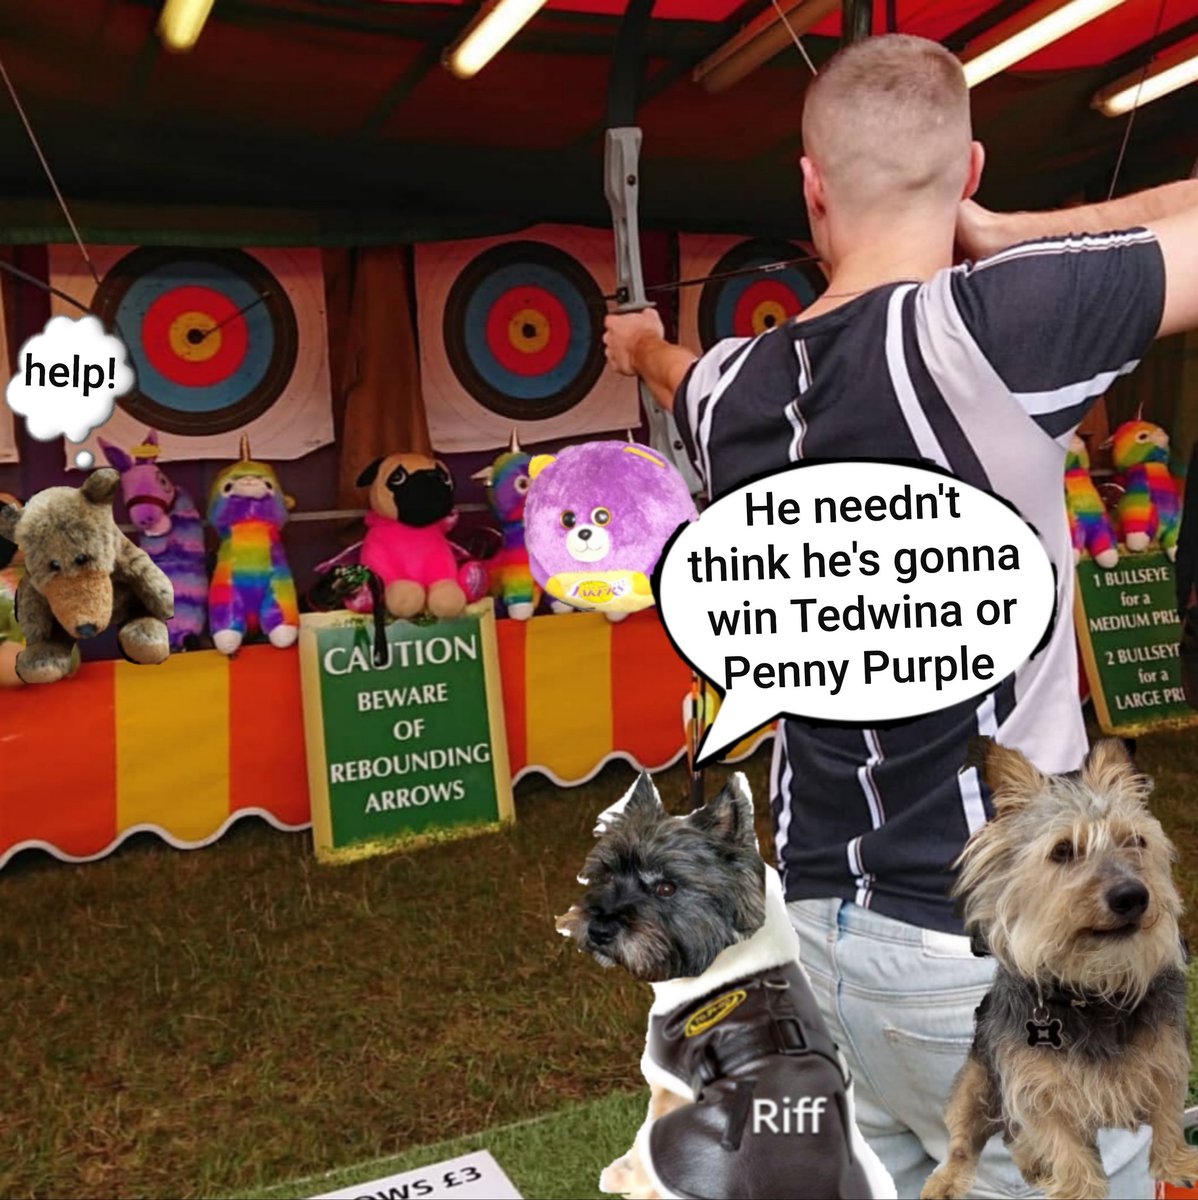 Oh no bestie there's Tedwina and Penny Purple!!! This man better not fink he's gonna win them cos they're ours!!!
@NormanTheCairn @CollieTwiggy #BovverBoys #zzst